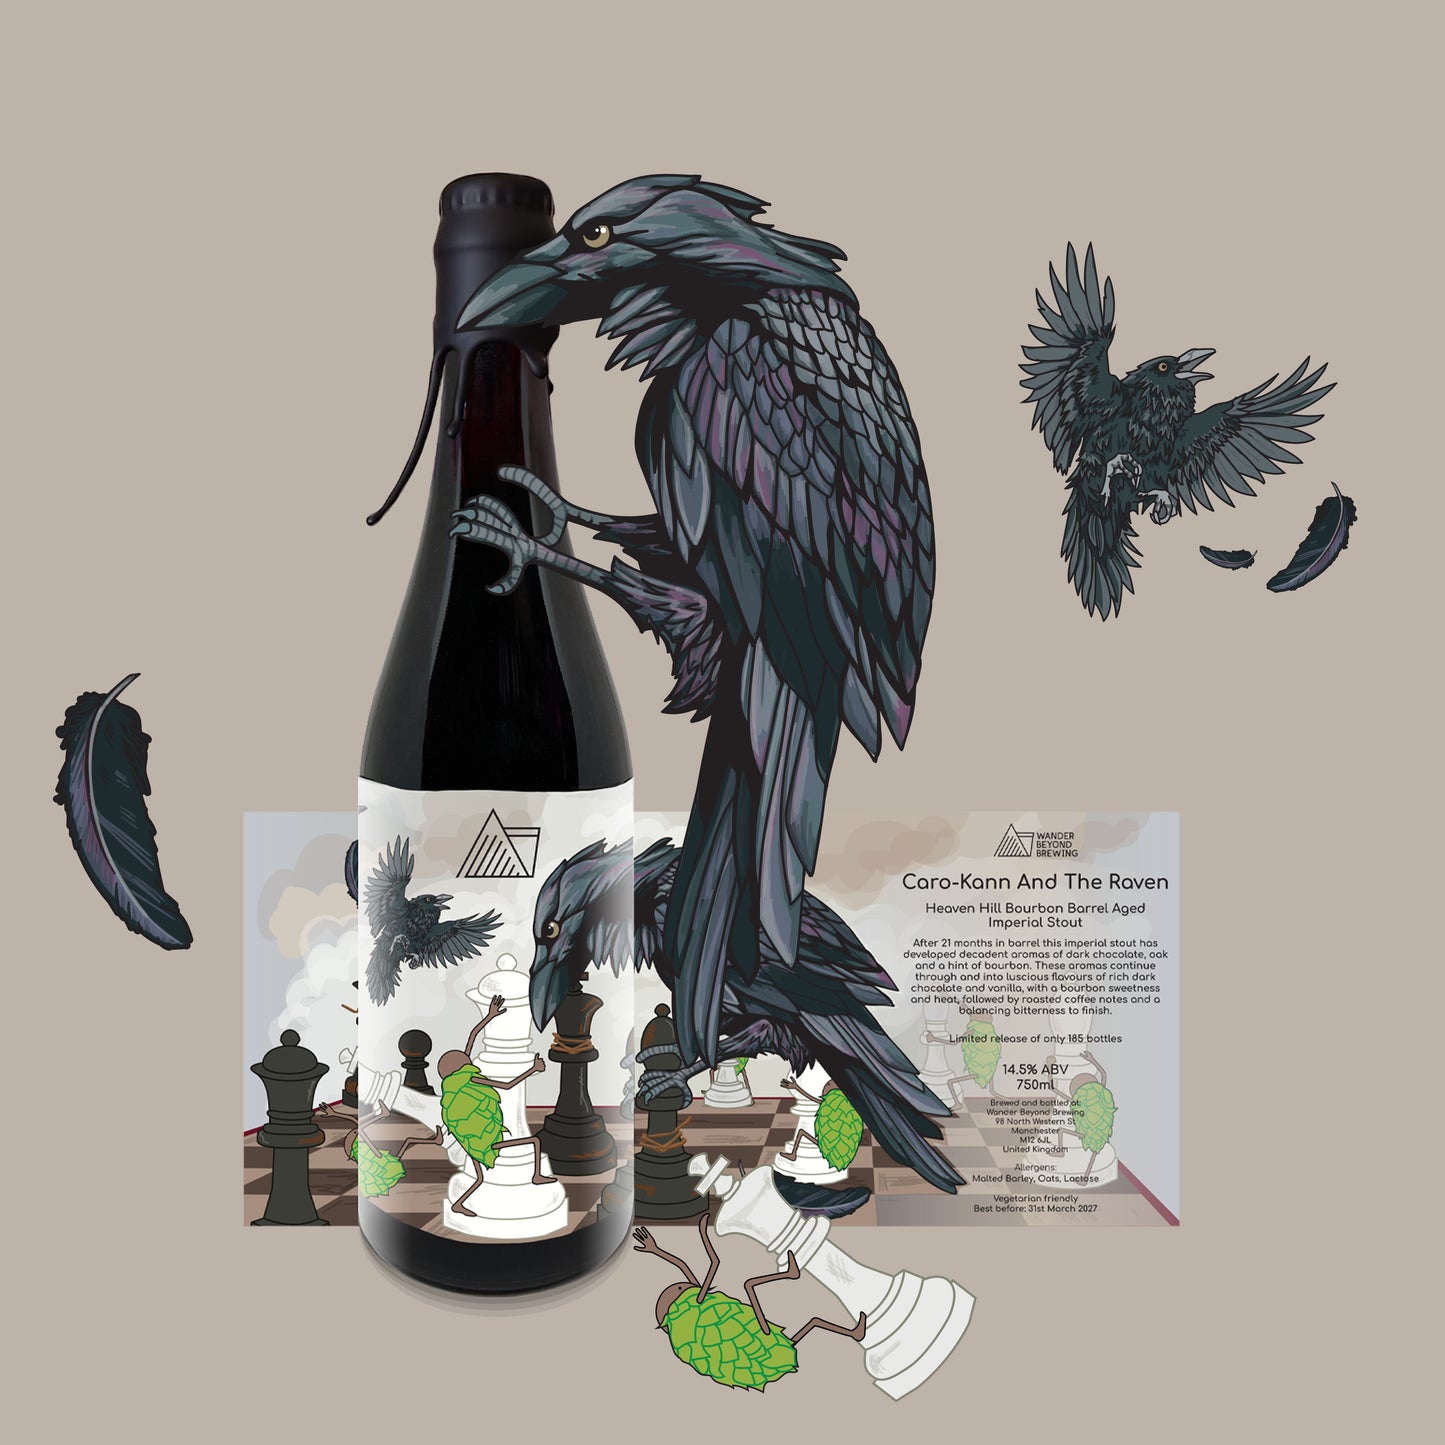 Caro-Kann And The Raven - Heaven Hill Bourbon Barrel Aged Imperial Stout